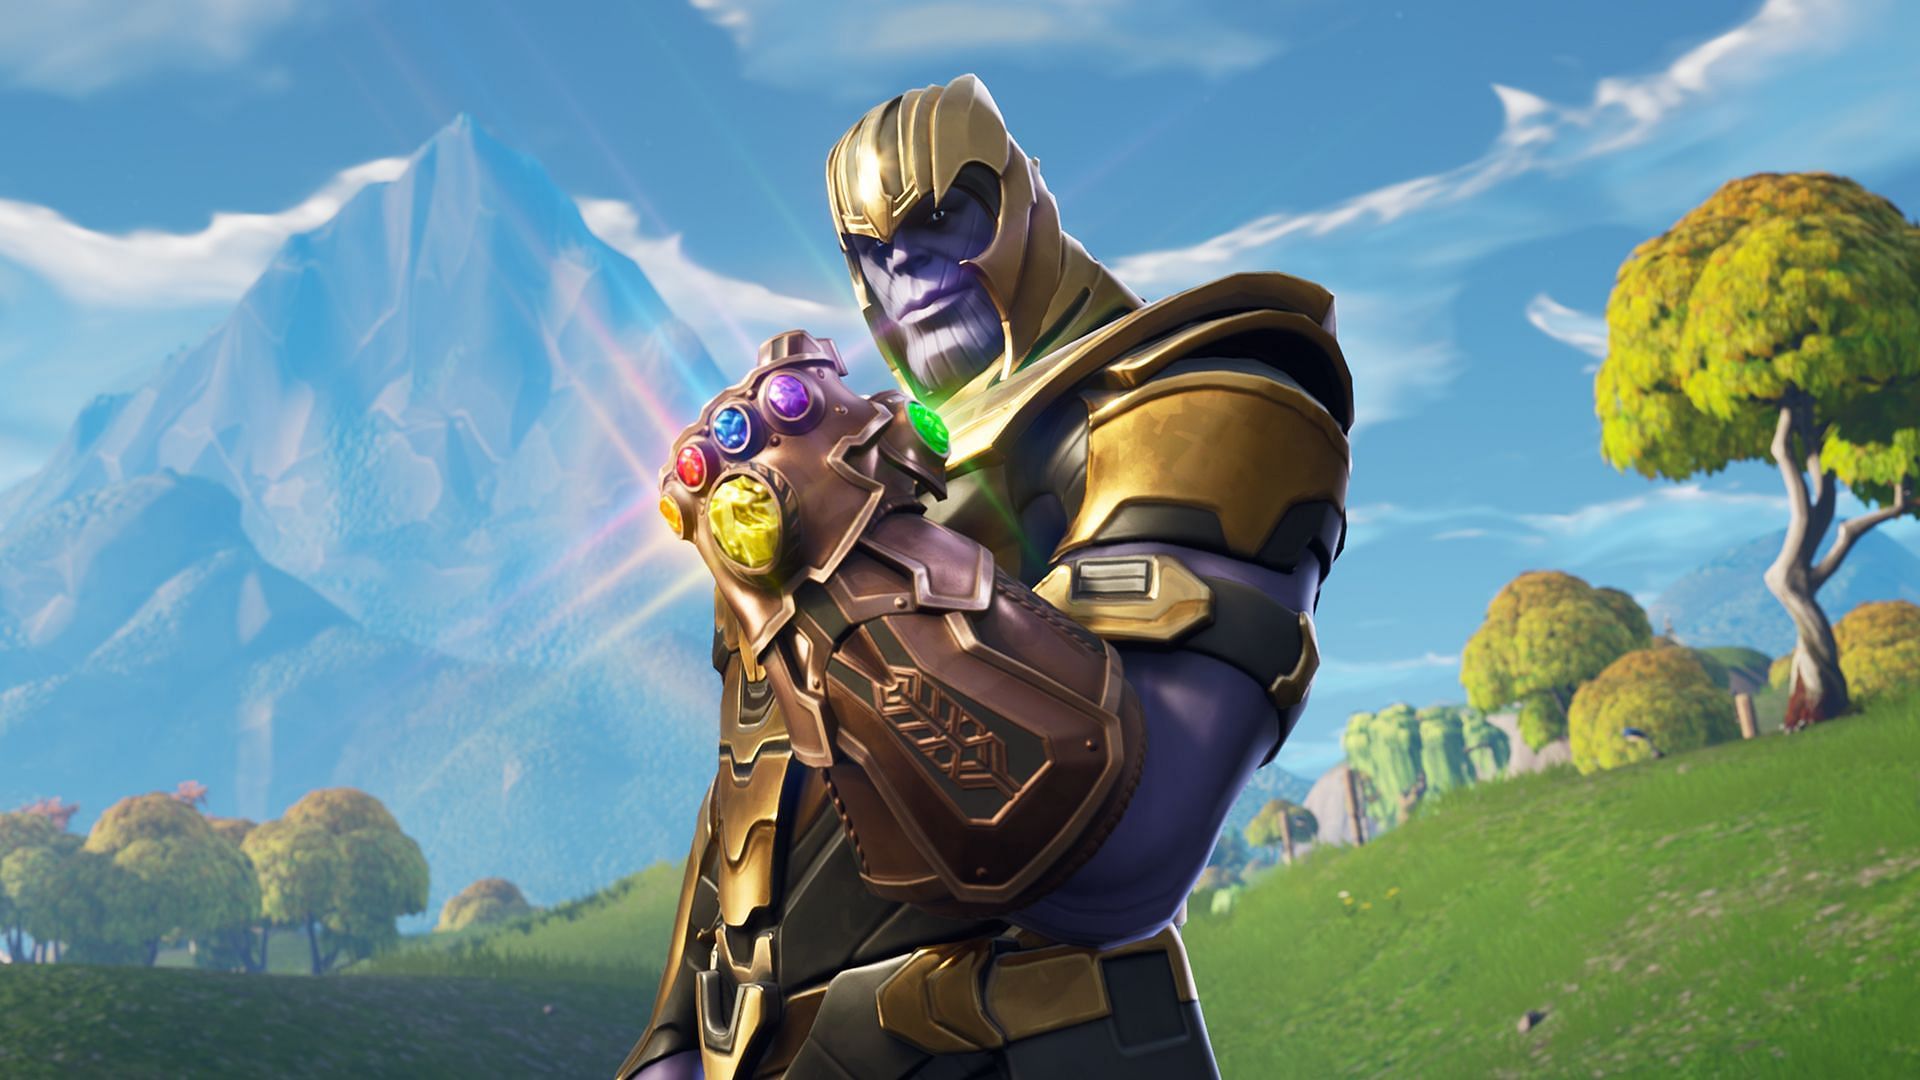 Thanos with the Gauntlet is an intensely powerful character. Image via Epic Games